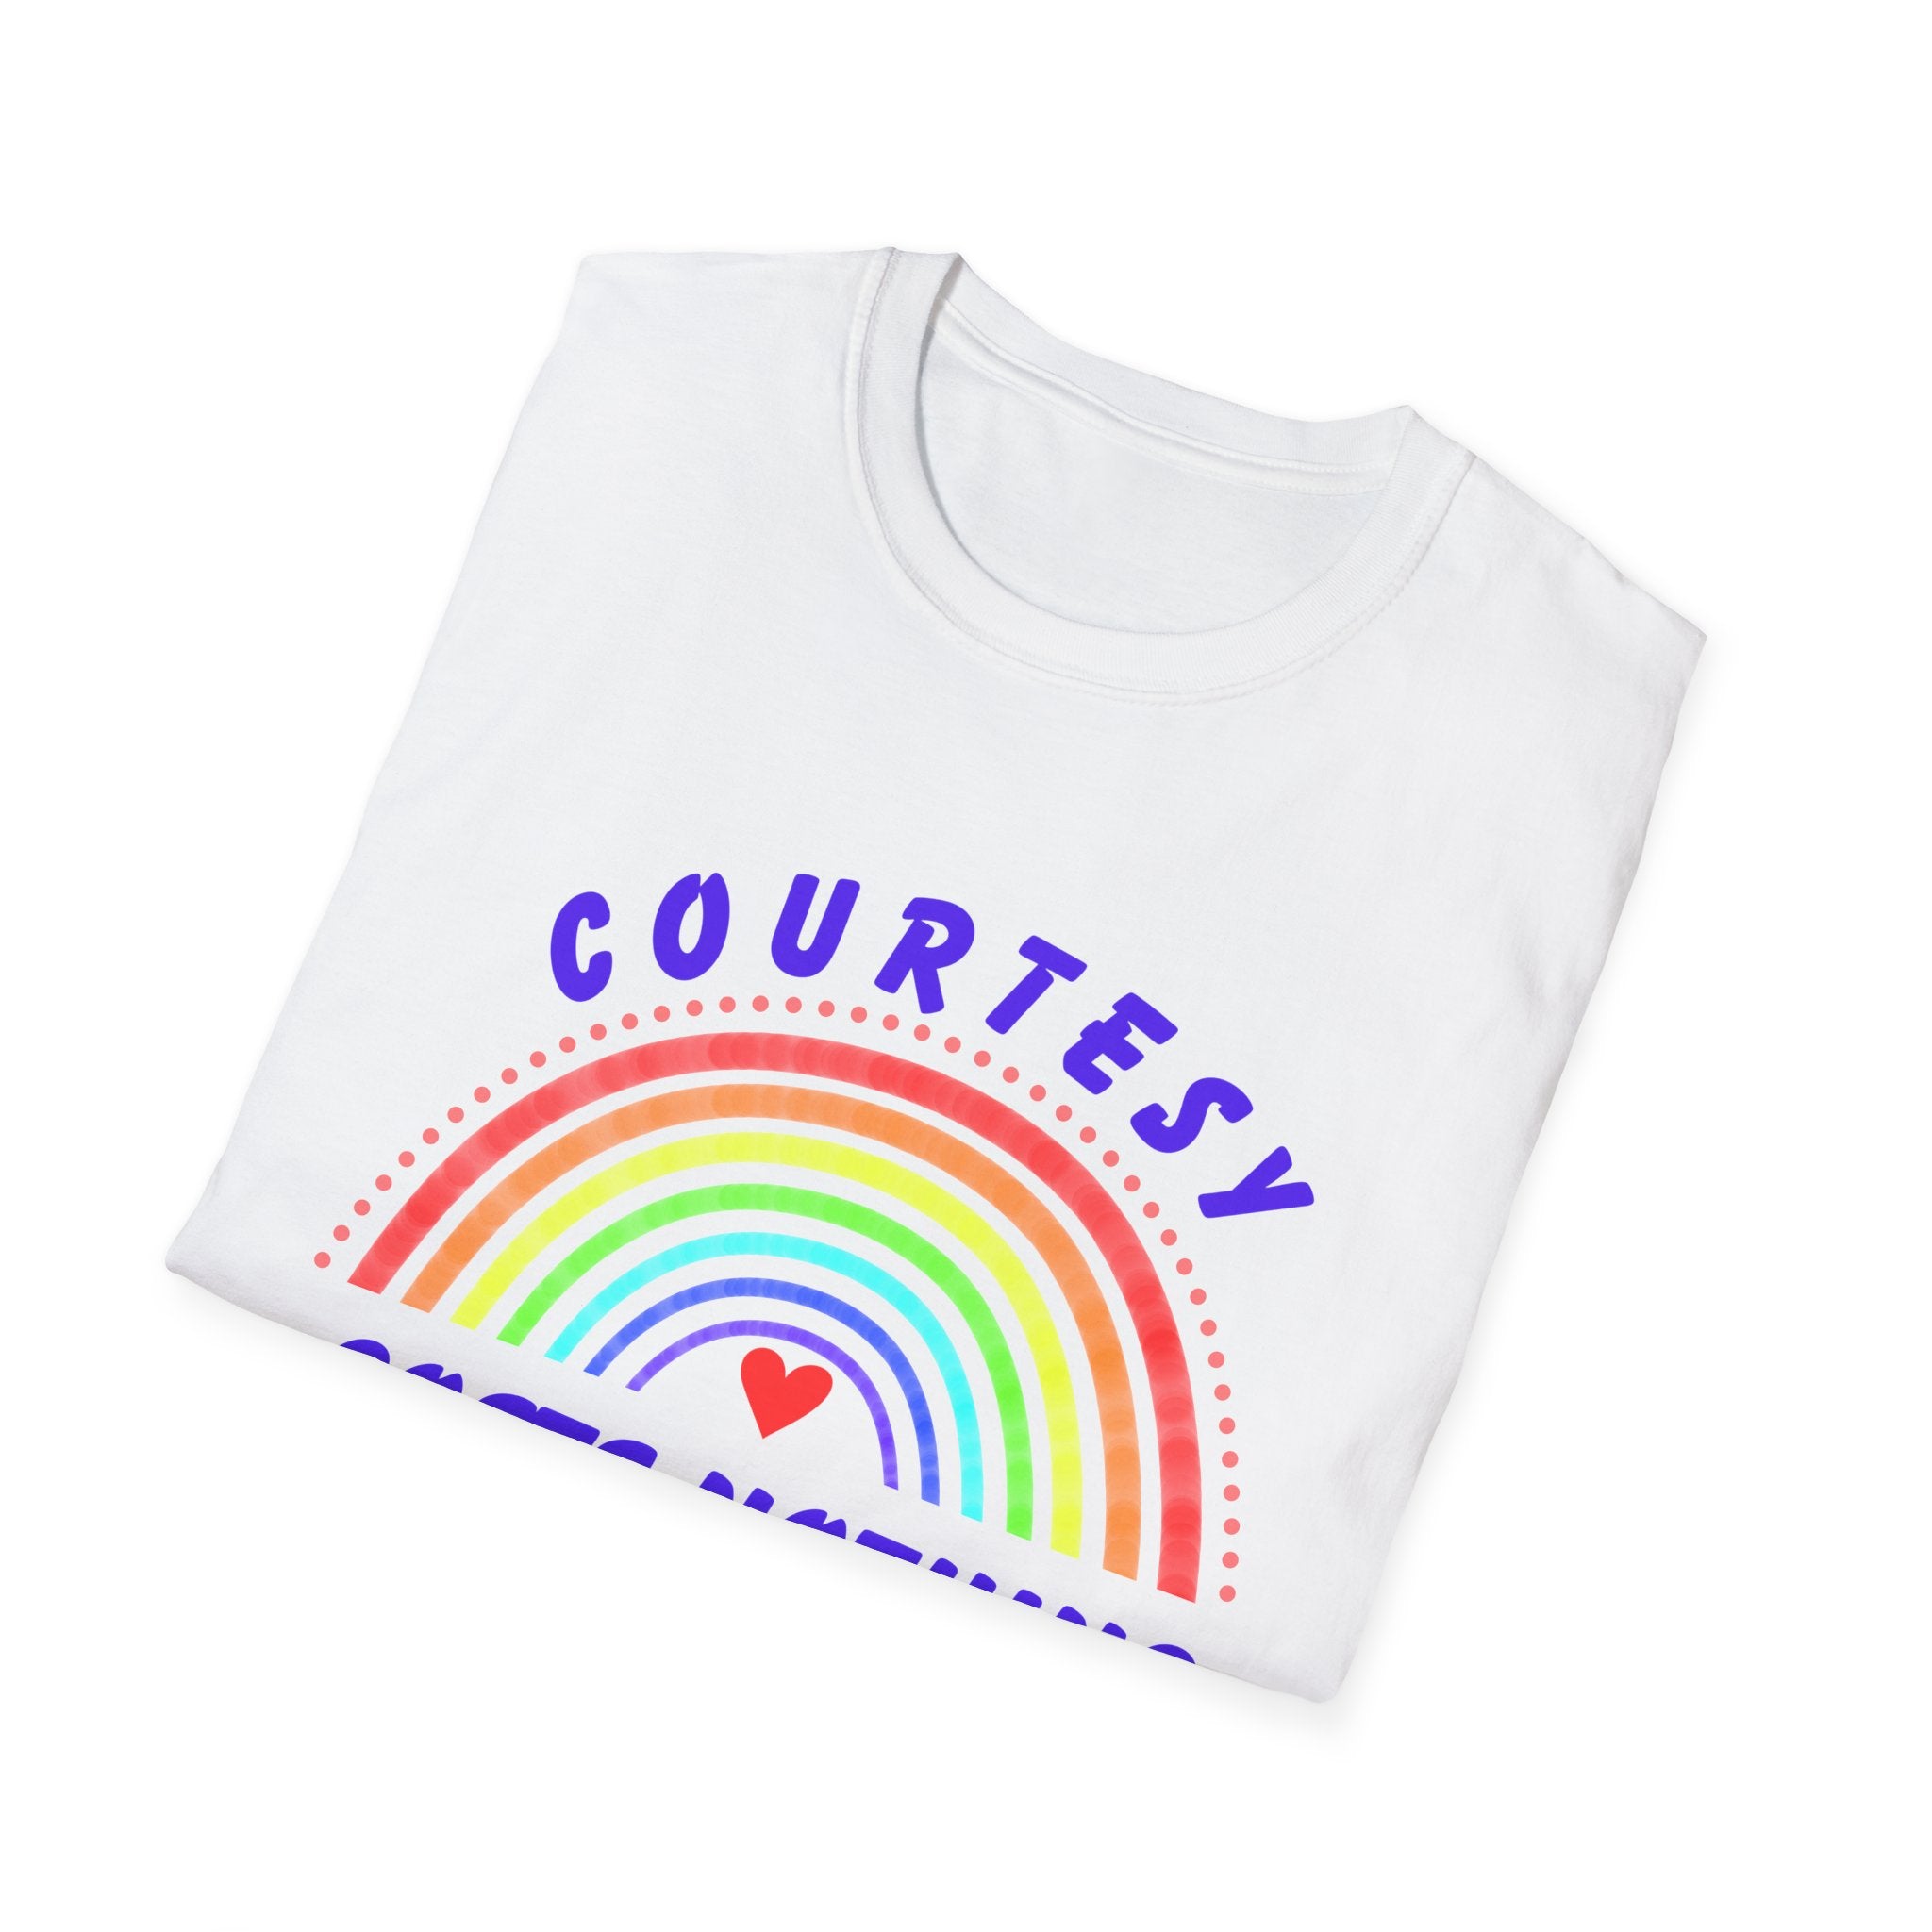 Courtesy Costs Nothing Unisex Softstyle T-Shirt, Respect for Others, Motivational Gift for Men and Women